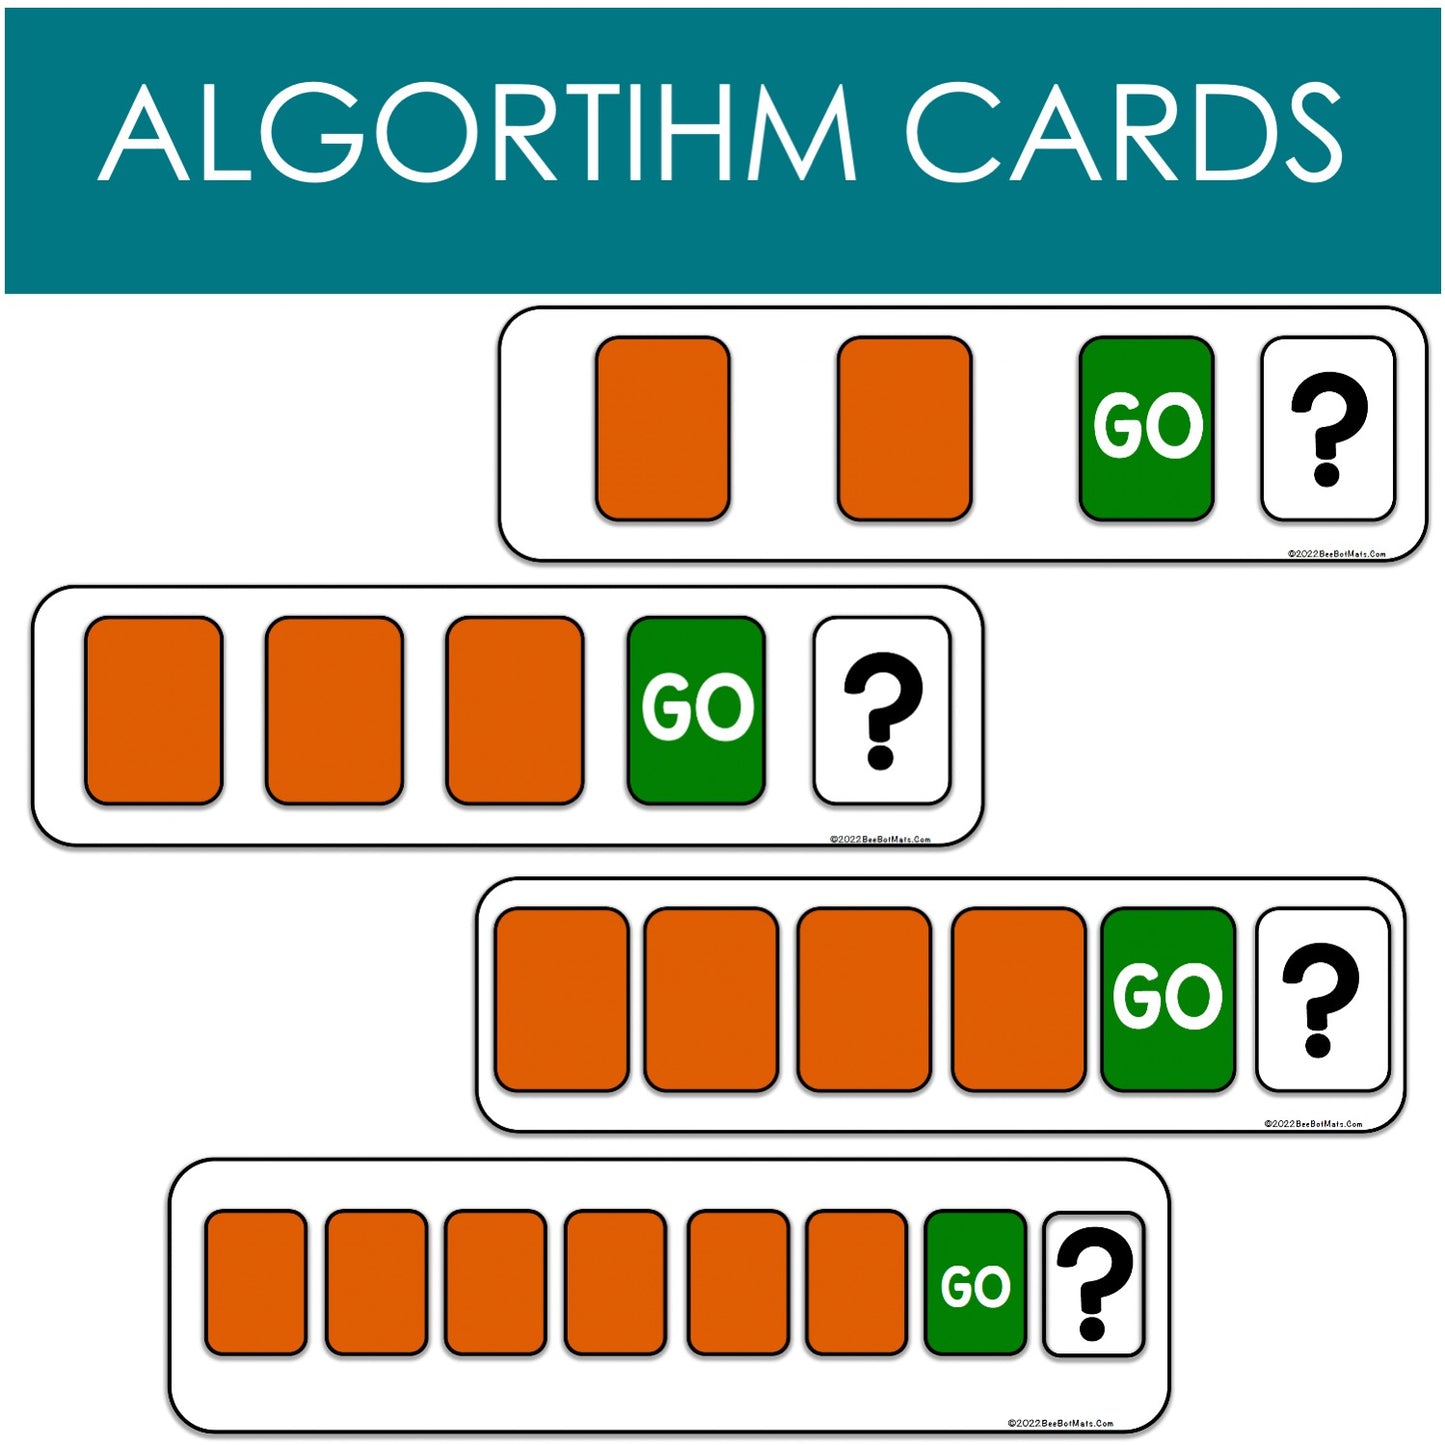 BeeBot algorithm cards